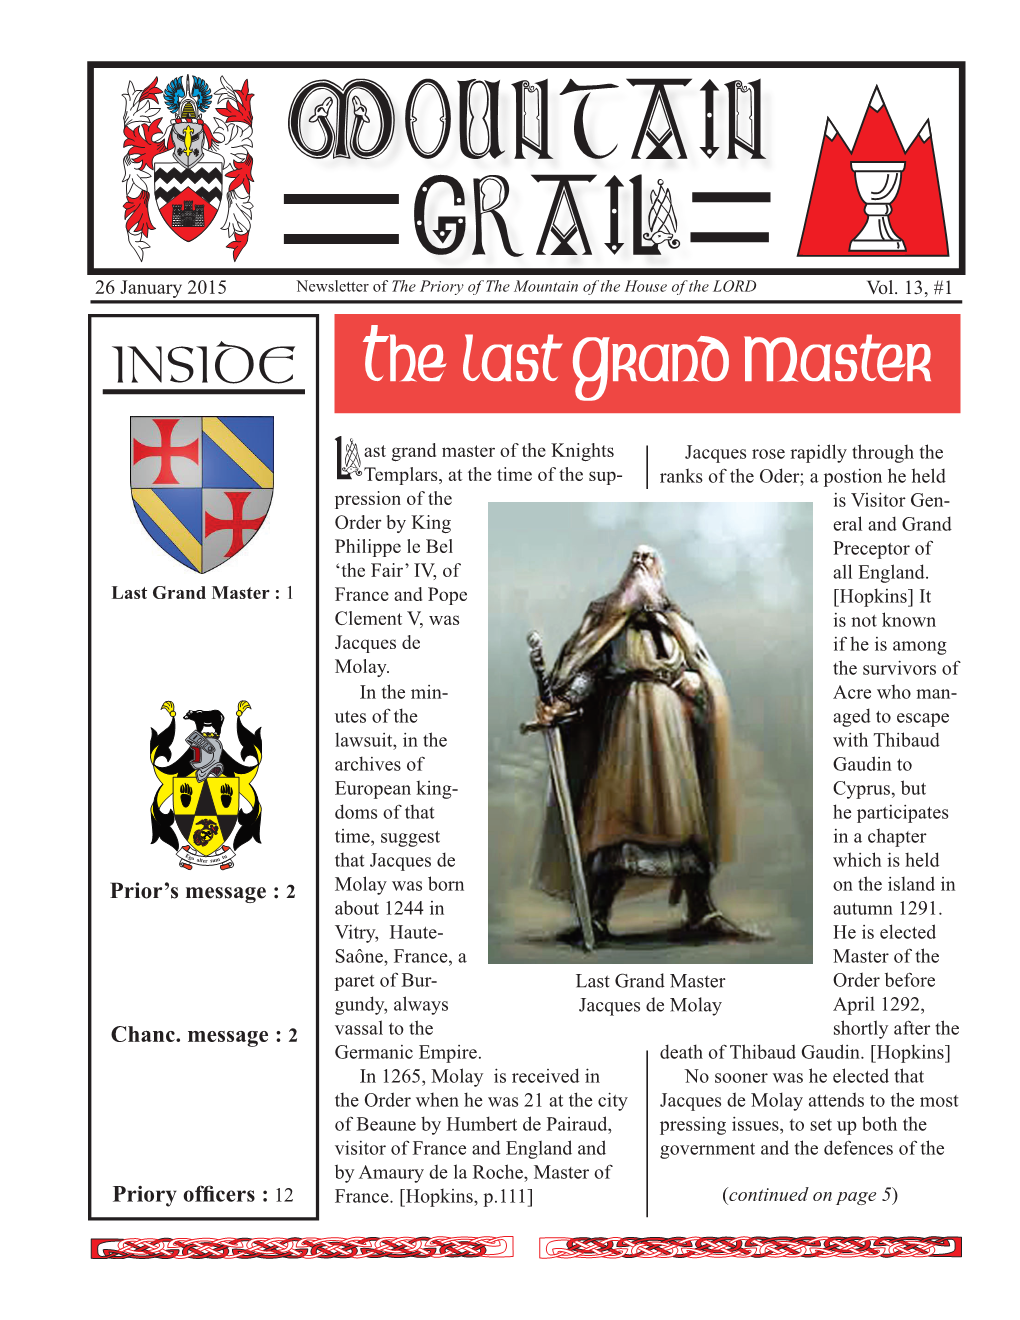 Mountain Grail 26 January 2015 Newsletter of the Priory of the Mountain of the House of the LORD Vol